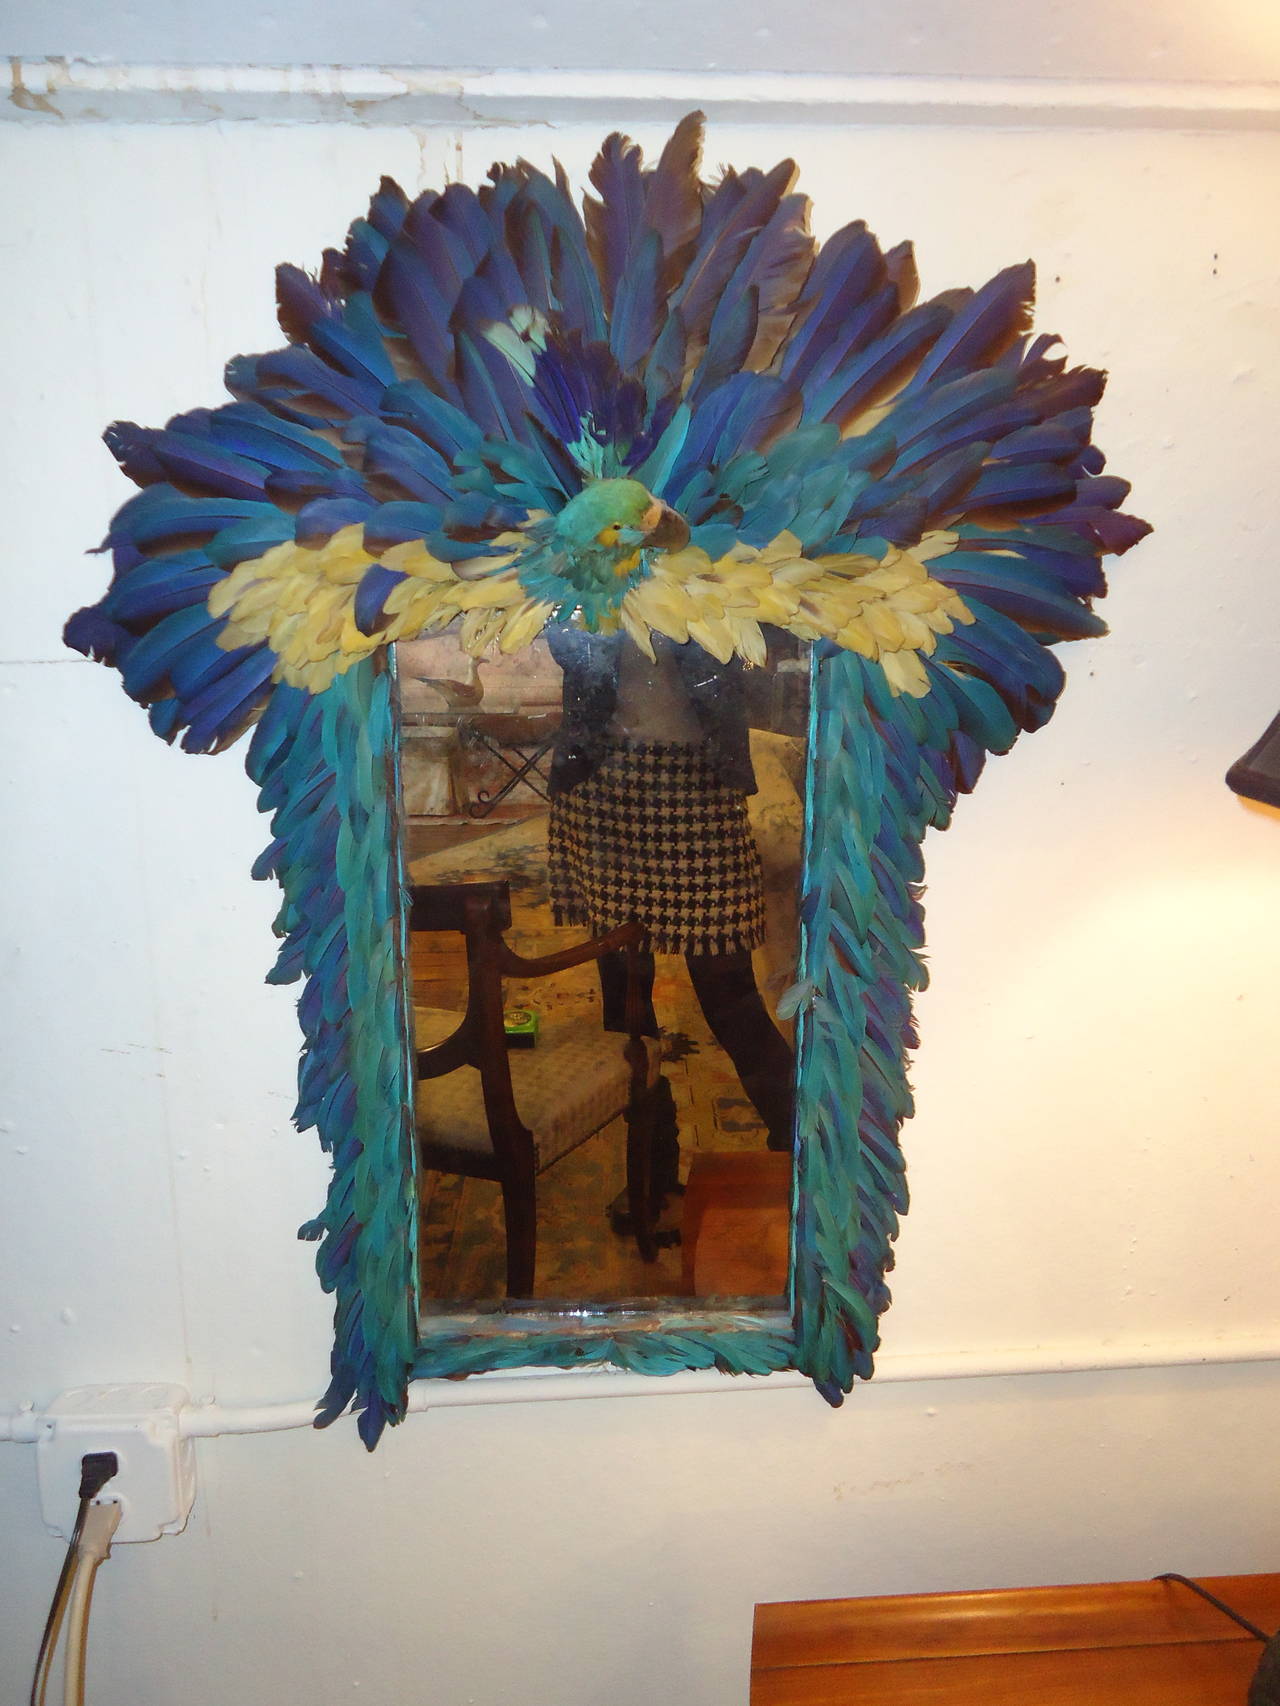 Hand created by famed NY Times photographer Bill Cunningham, signed on the reverse and dated 1968. Aged mirror is framed in bright blue and cream colored feathers and the taxidermy head of a tropical bird.